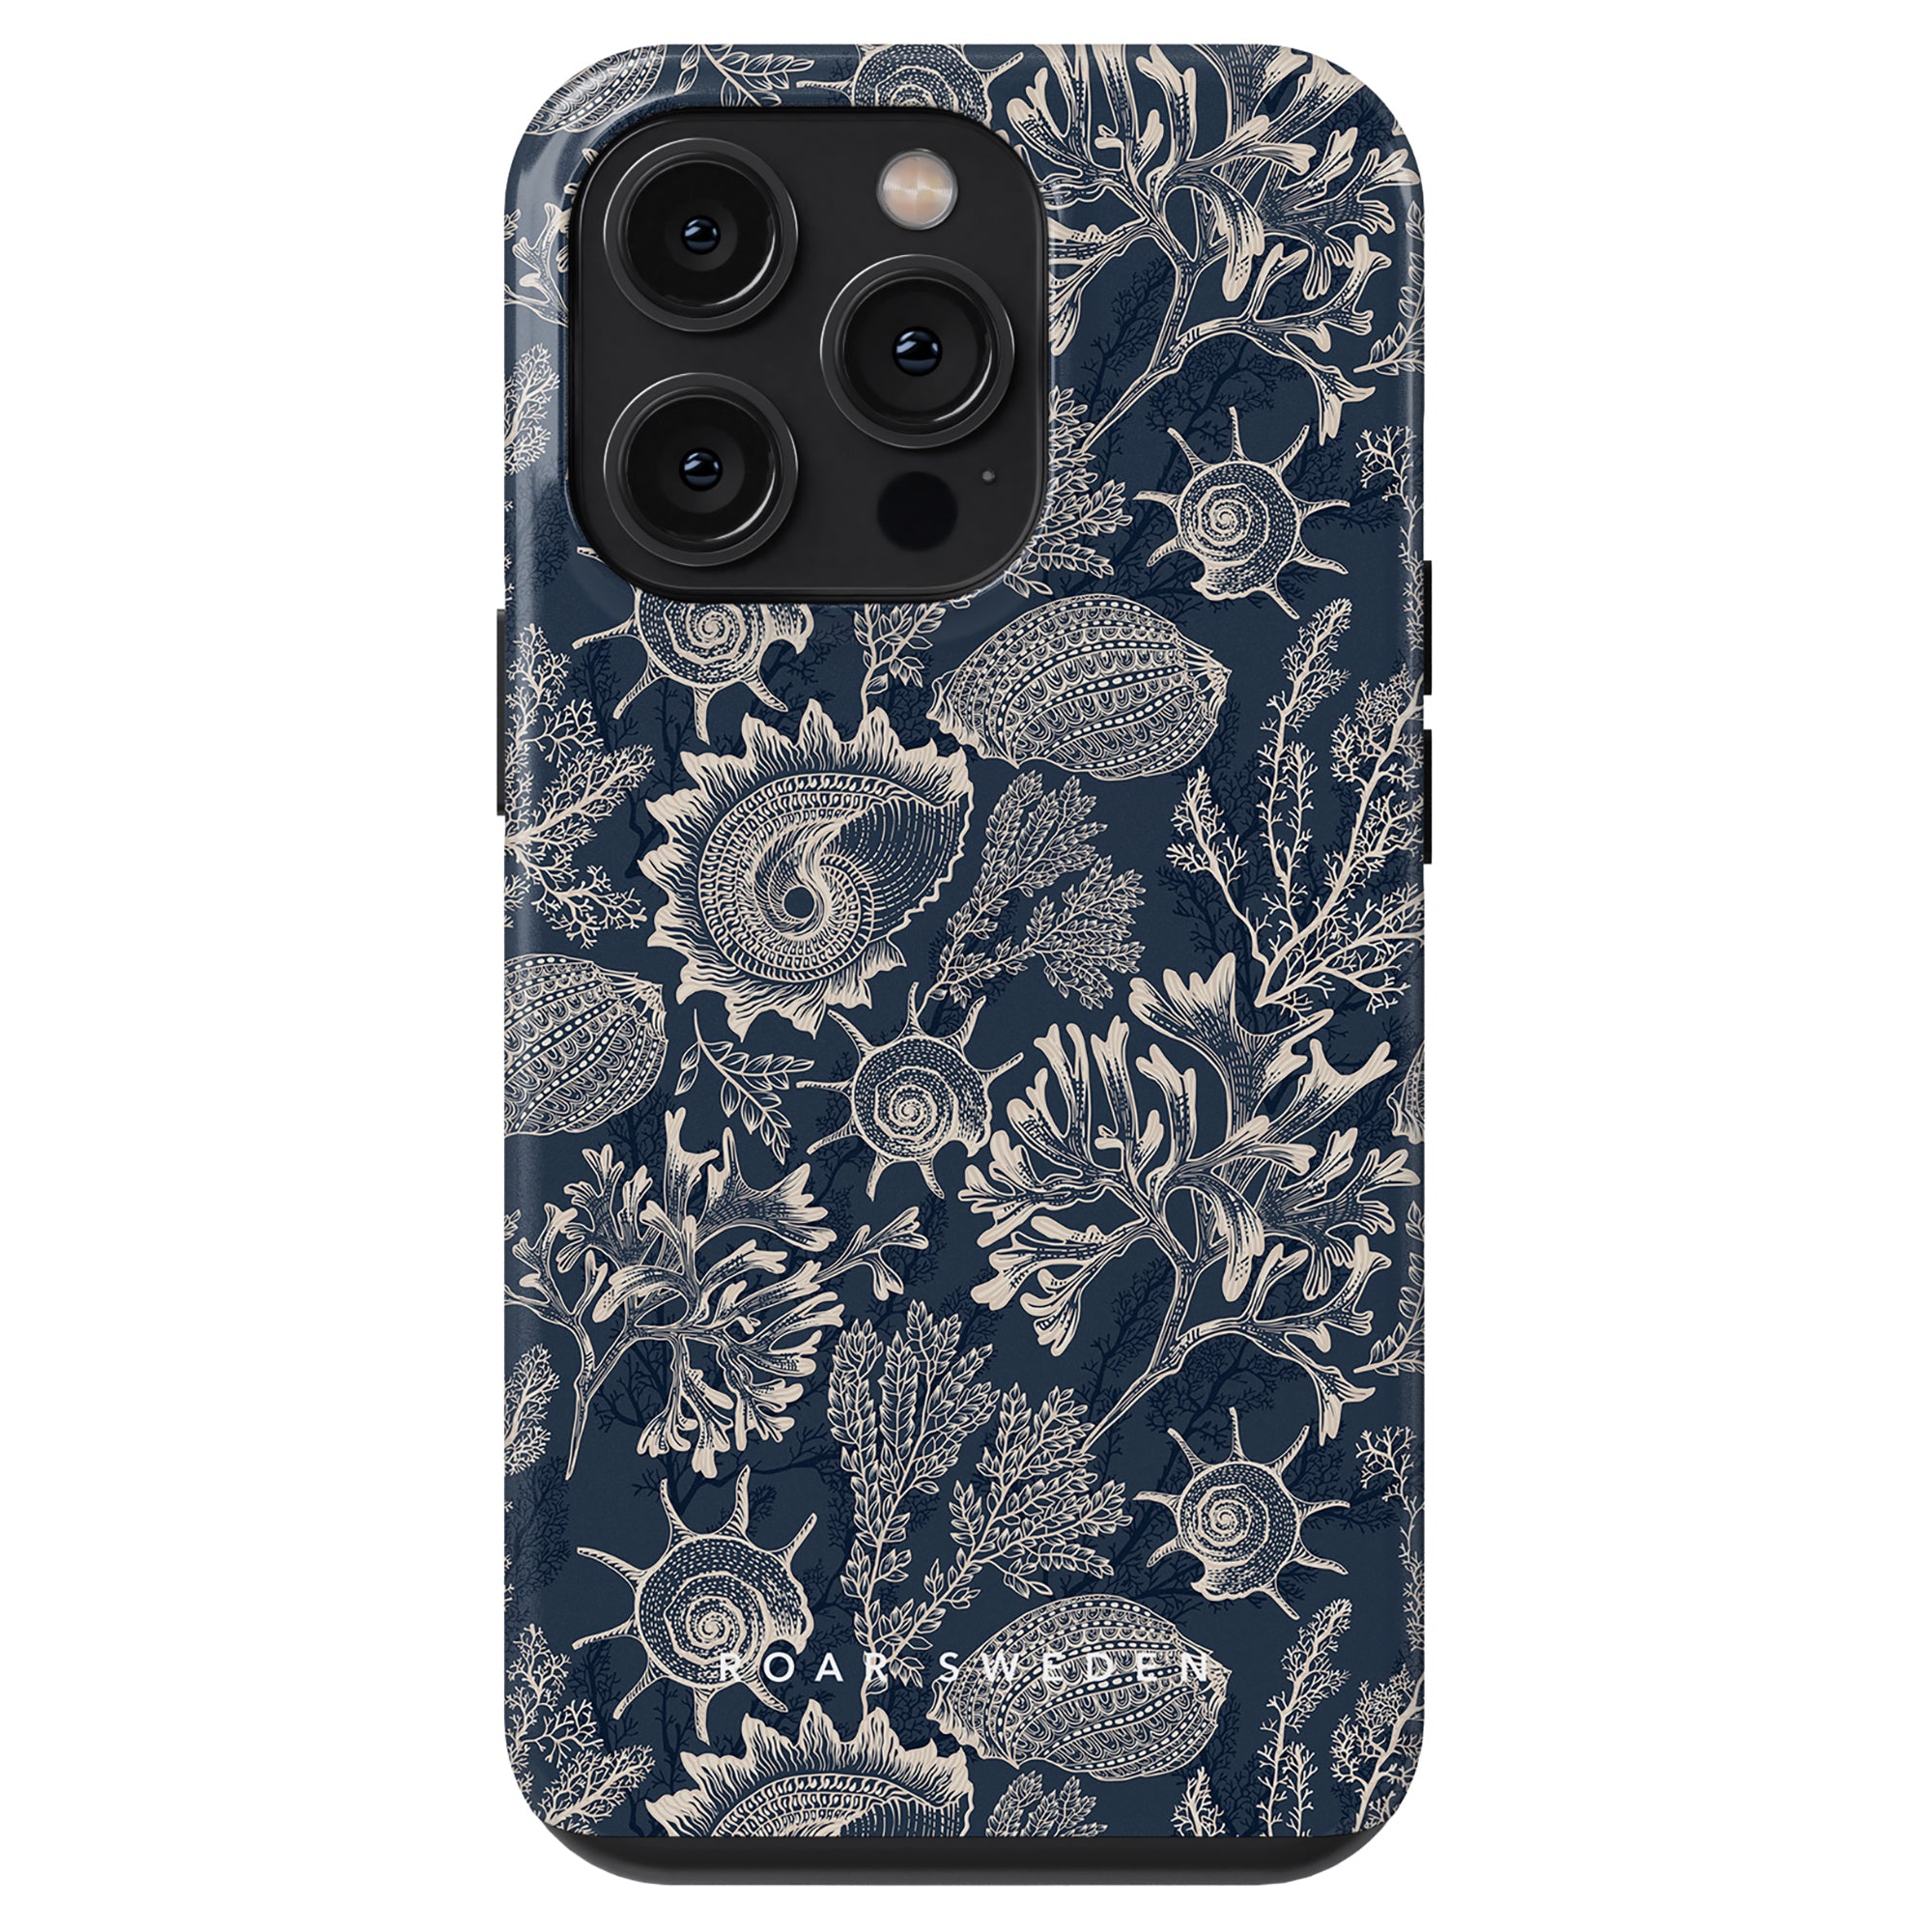 A Blue Corals - Tough Case iPhone case in dark blue and cream, featuring intricate botanical designs and cutouts for three camera lenses, branded by Ideal of Sweden as part of their Ocean Kollektion.